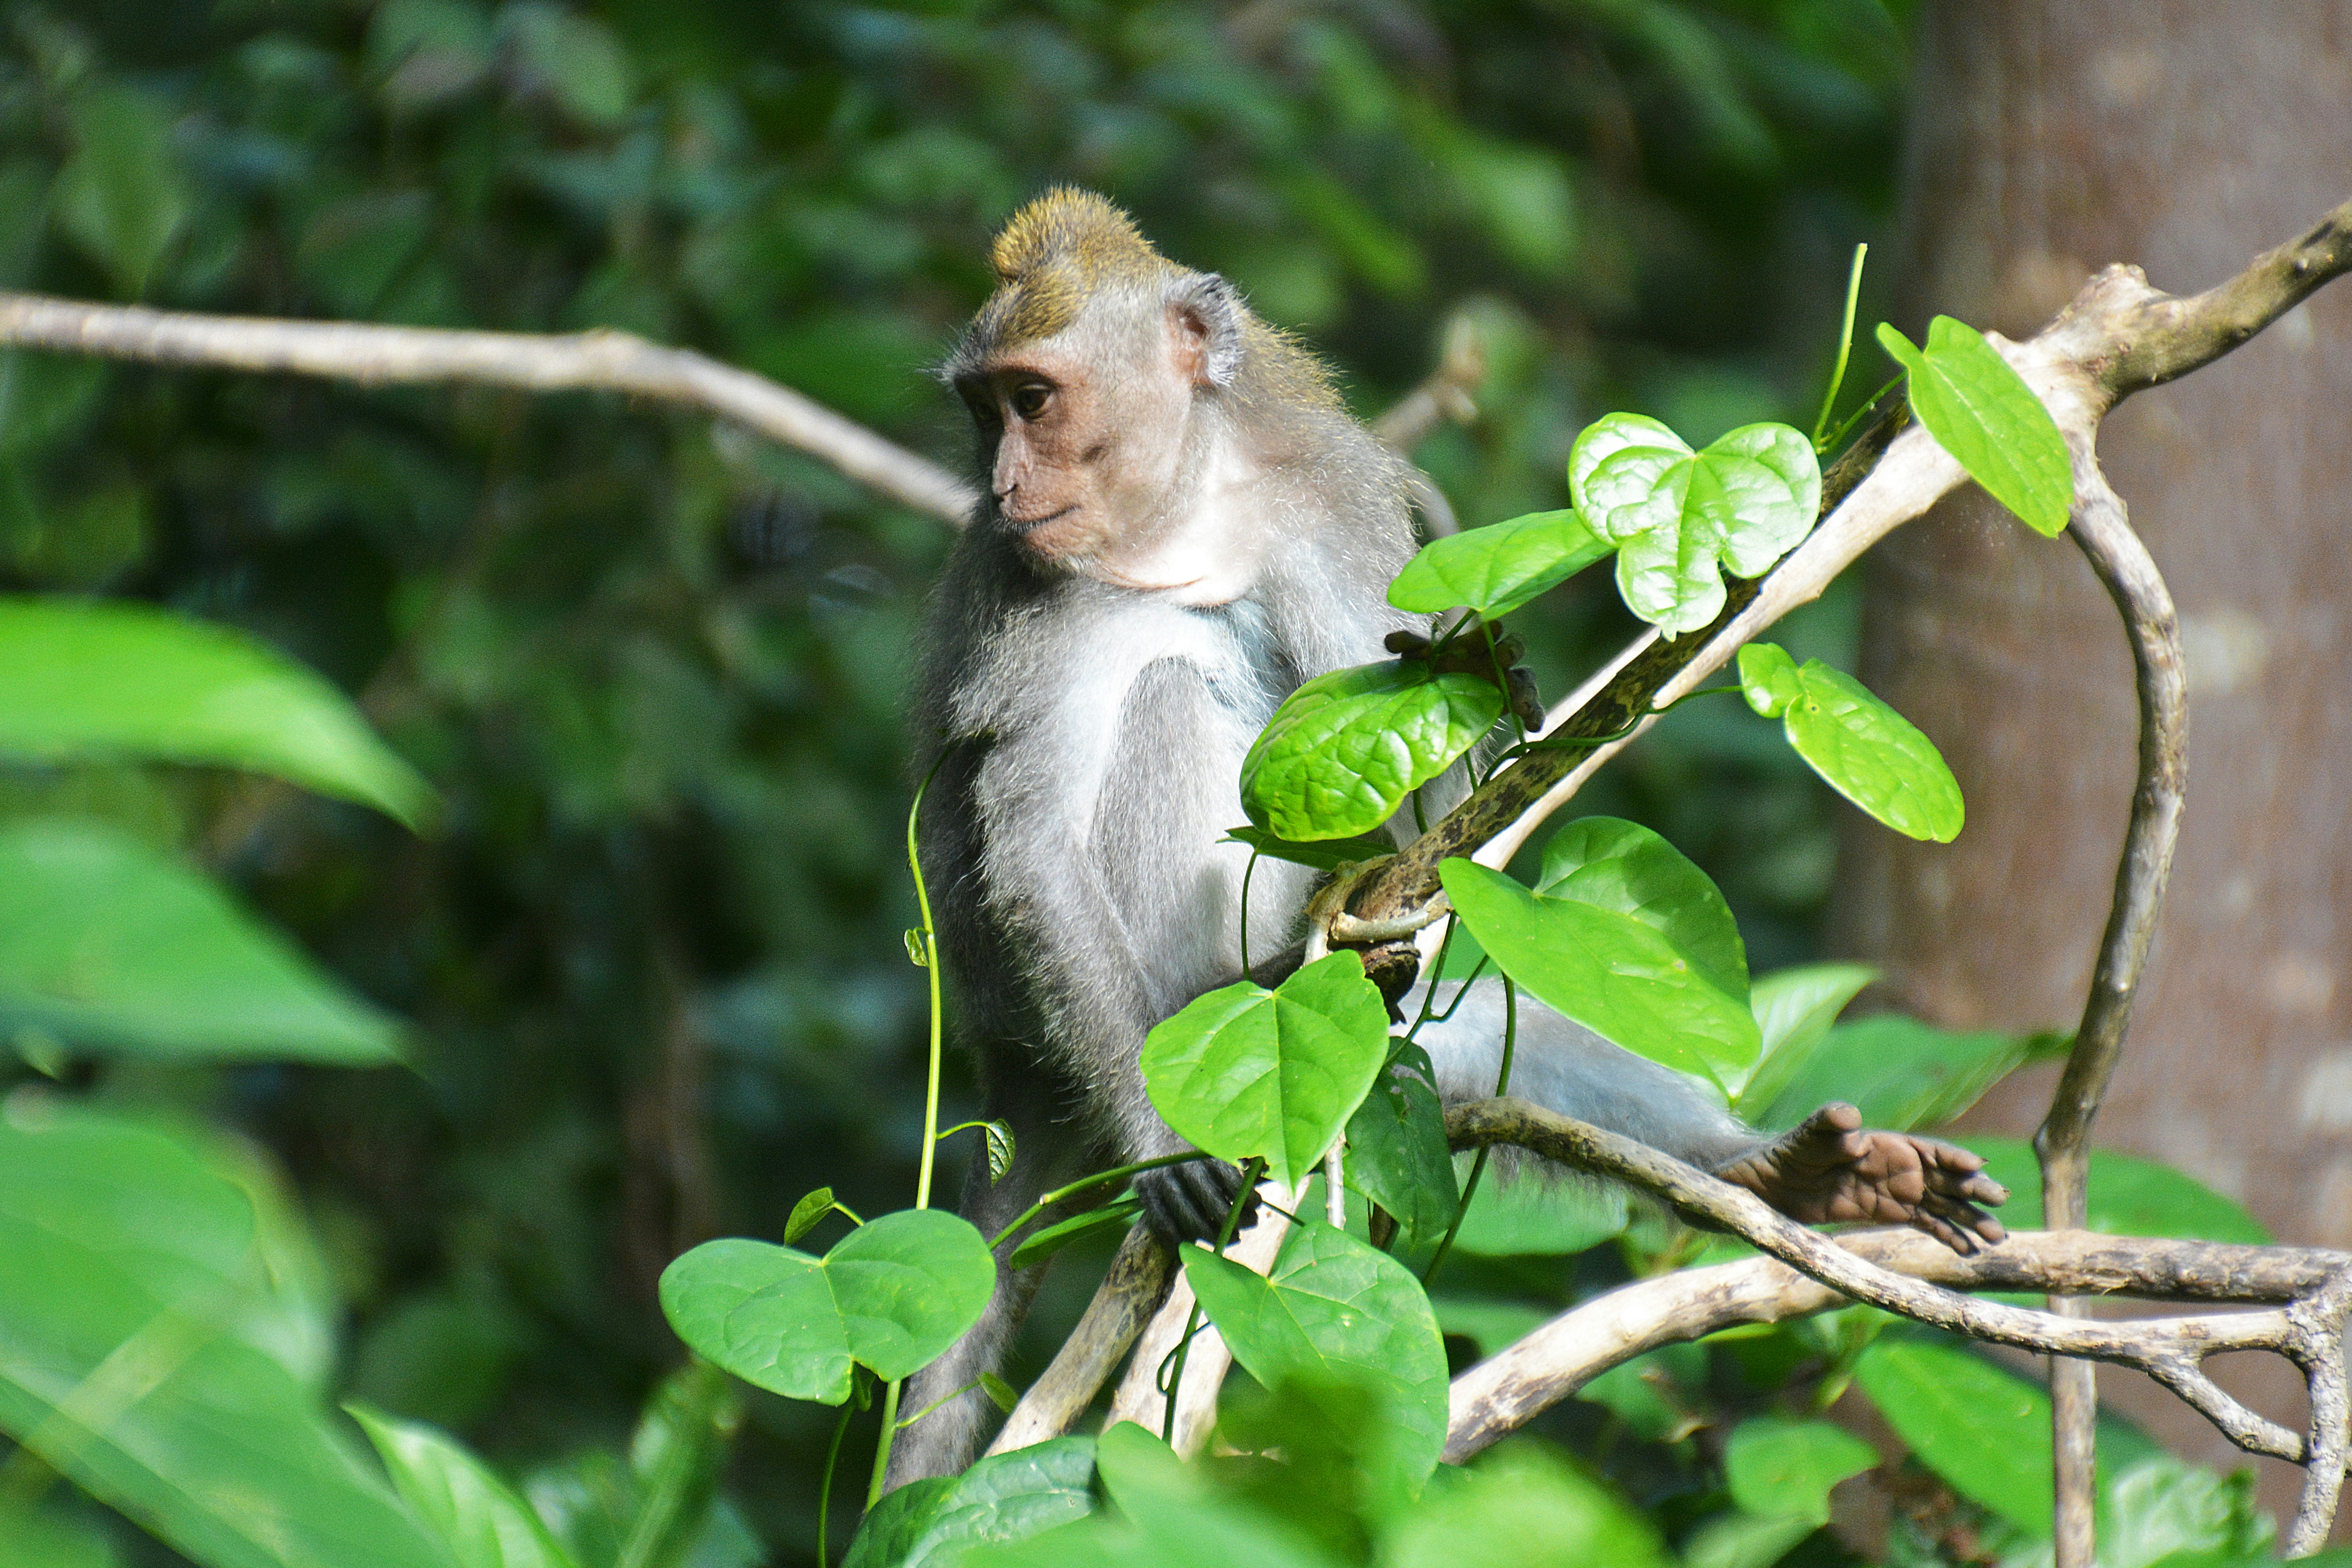 brown monkey on green tree branch during daytime